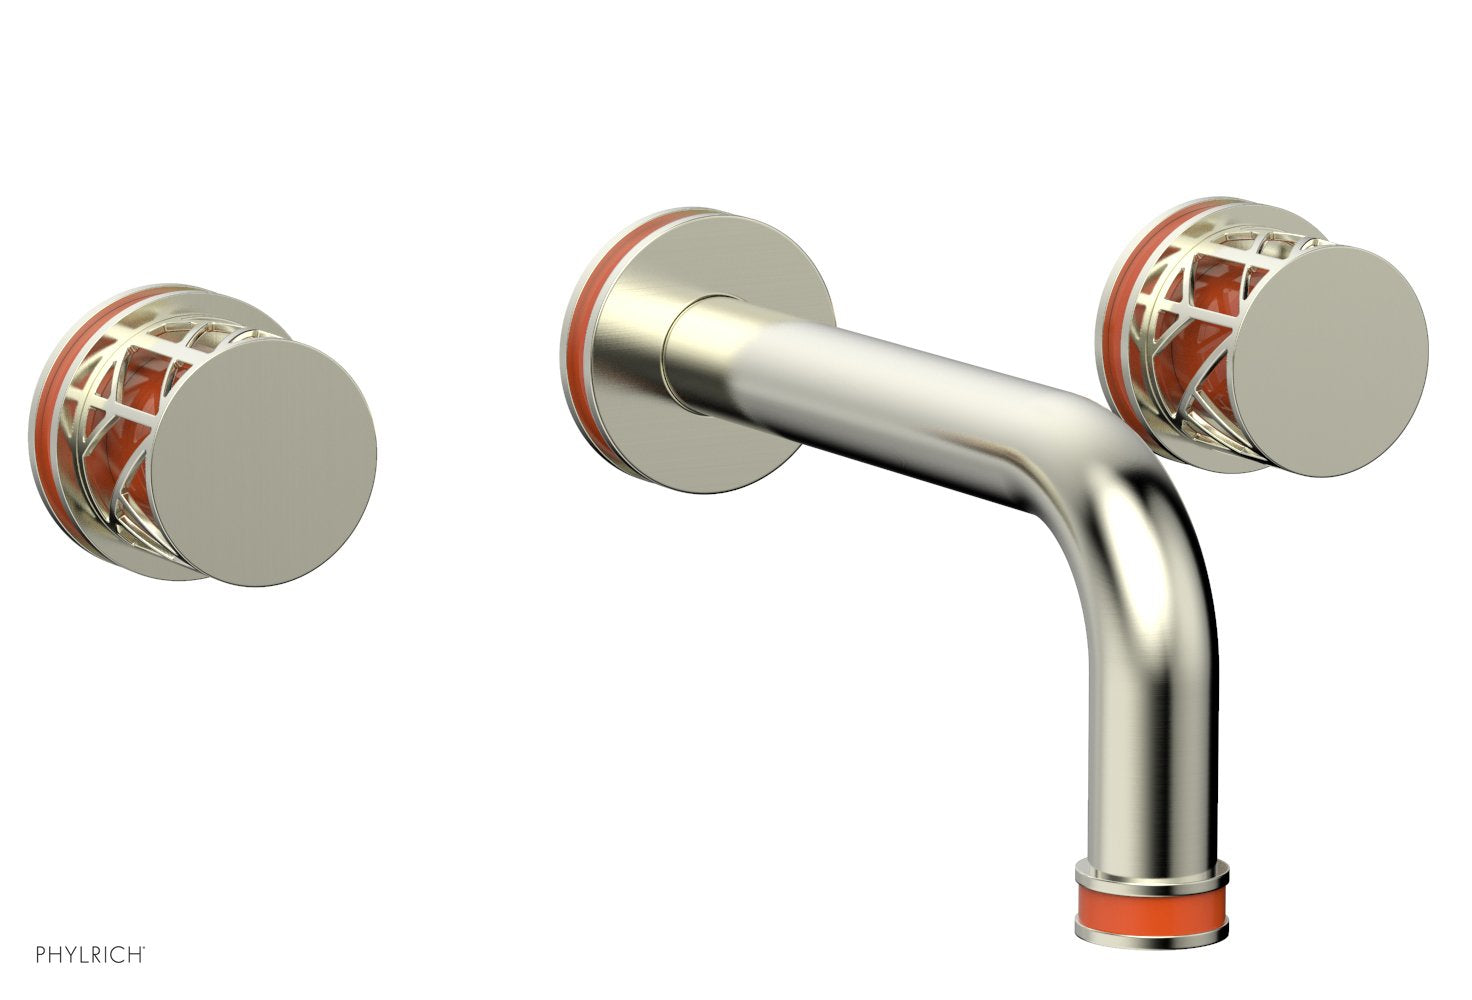 Phylrich JOLIE Wall Lavatory Set - Round Handles with "Orange" Accents